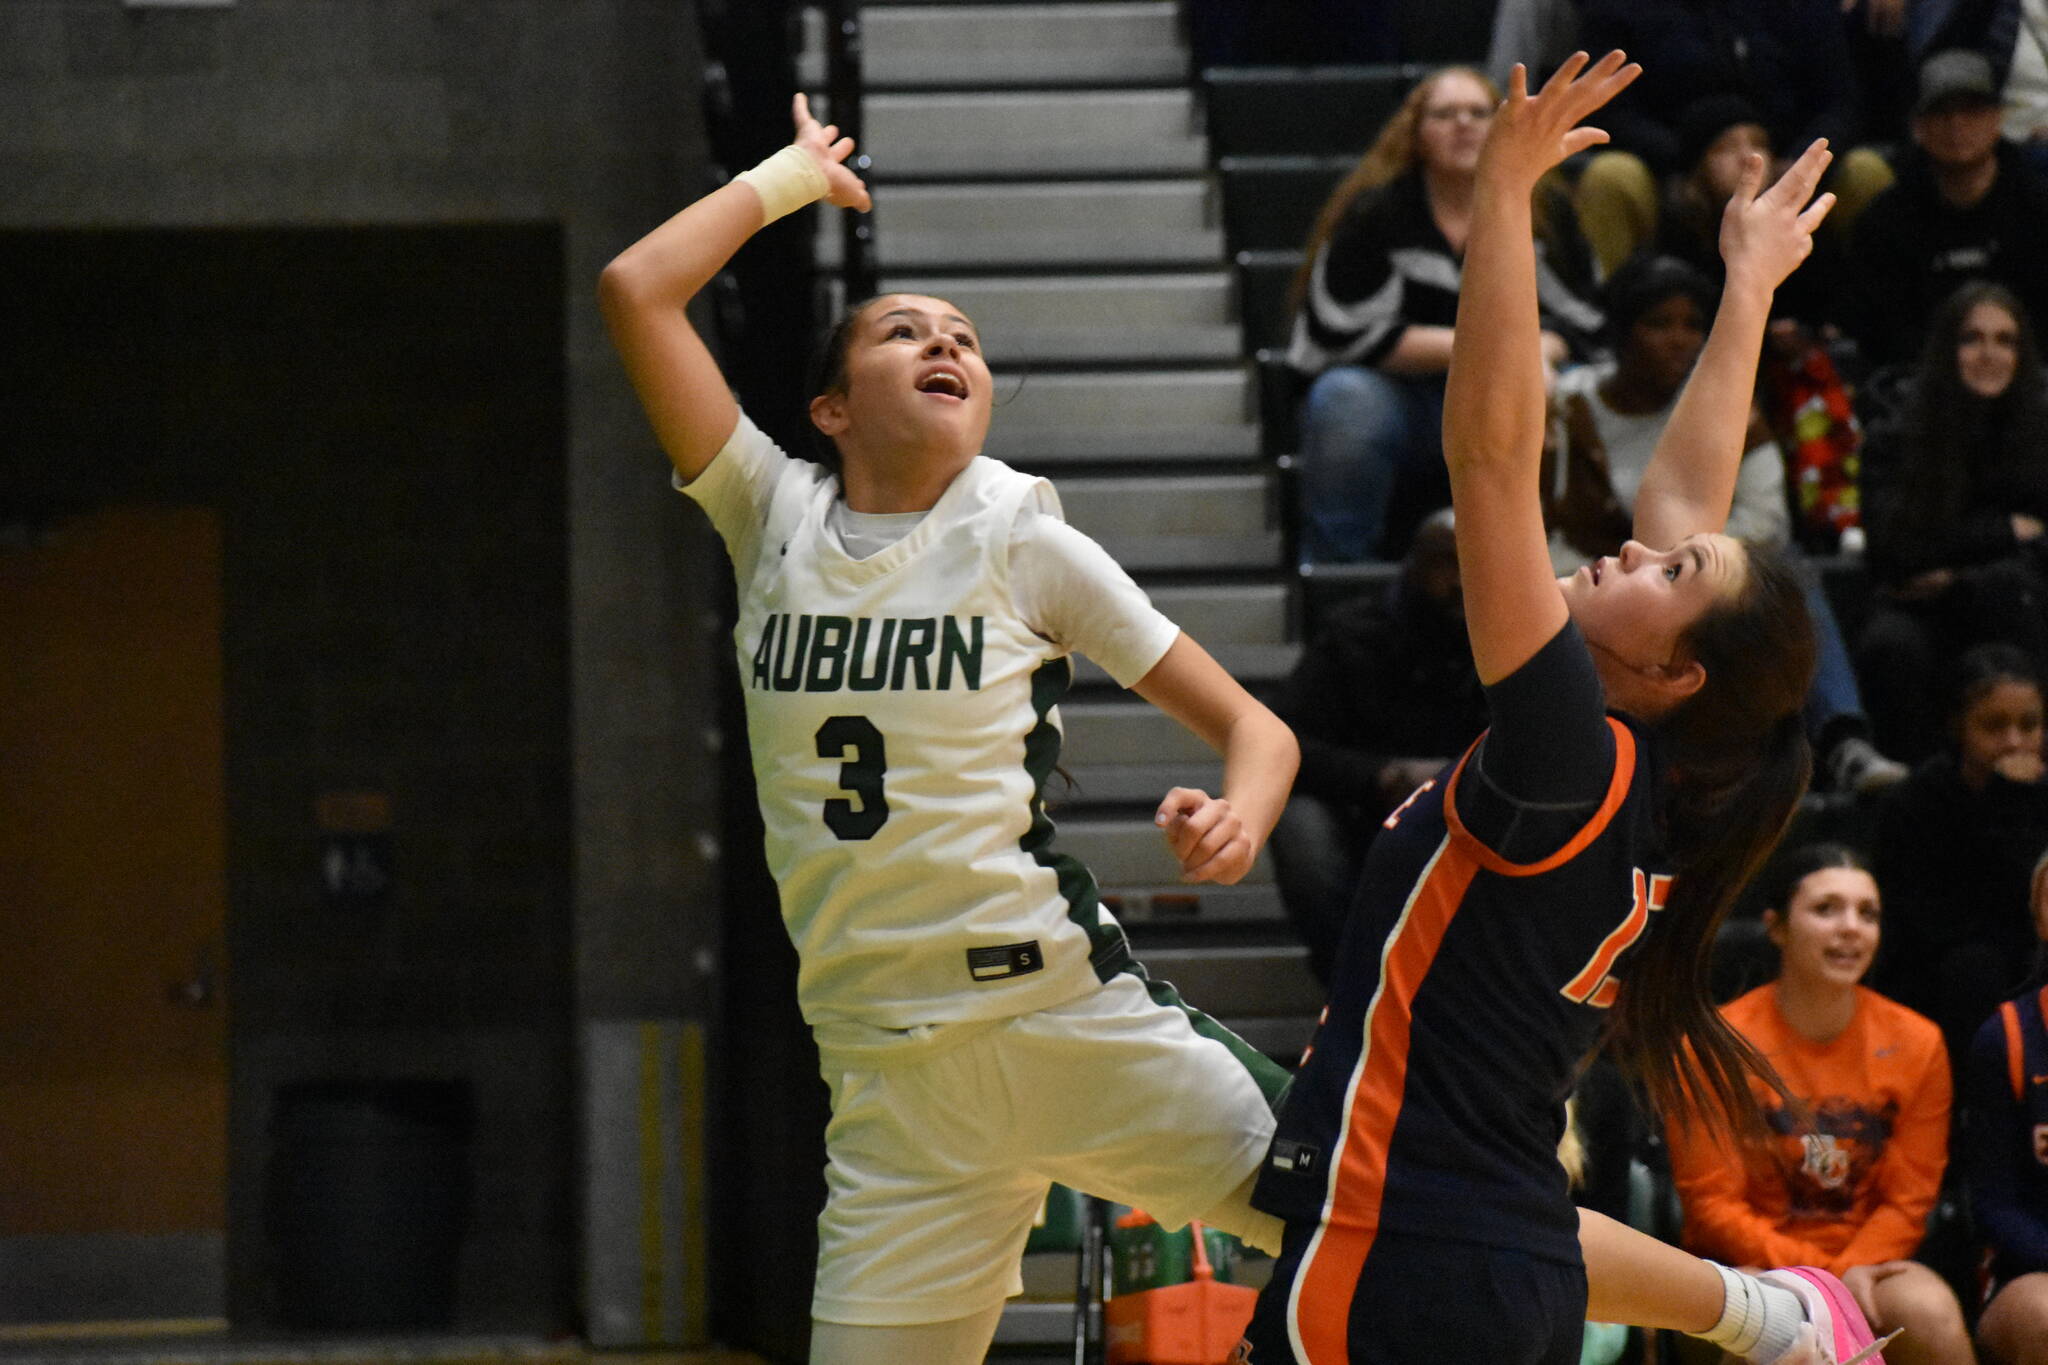 Auburn senior Jayla Brown comes down after a layup attempt. Ben Ray / The Reporter